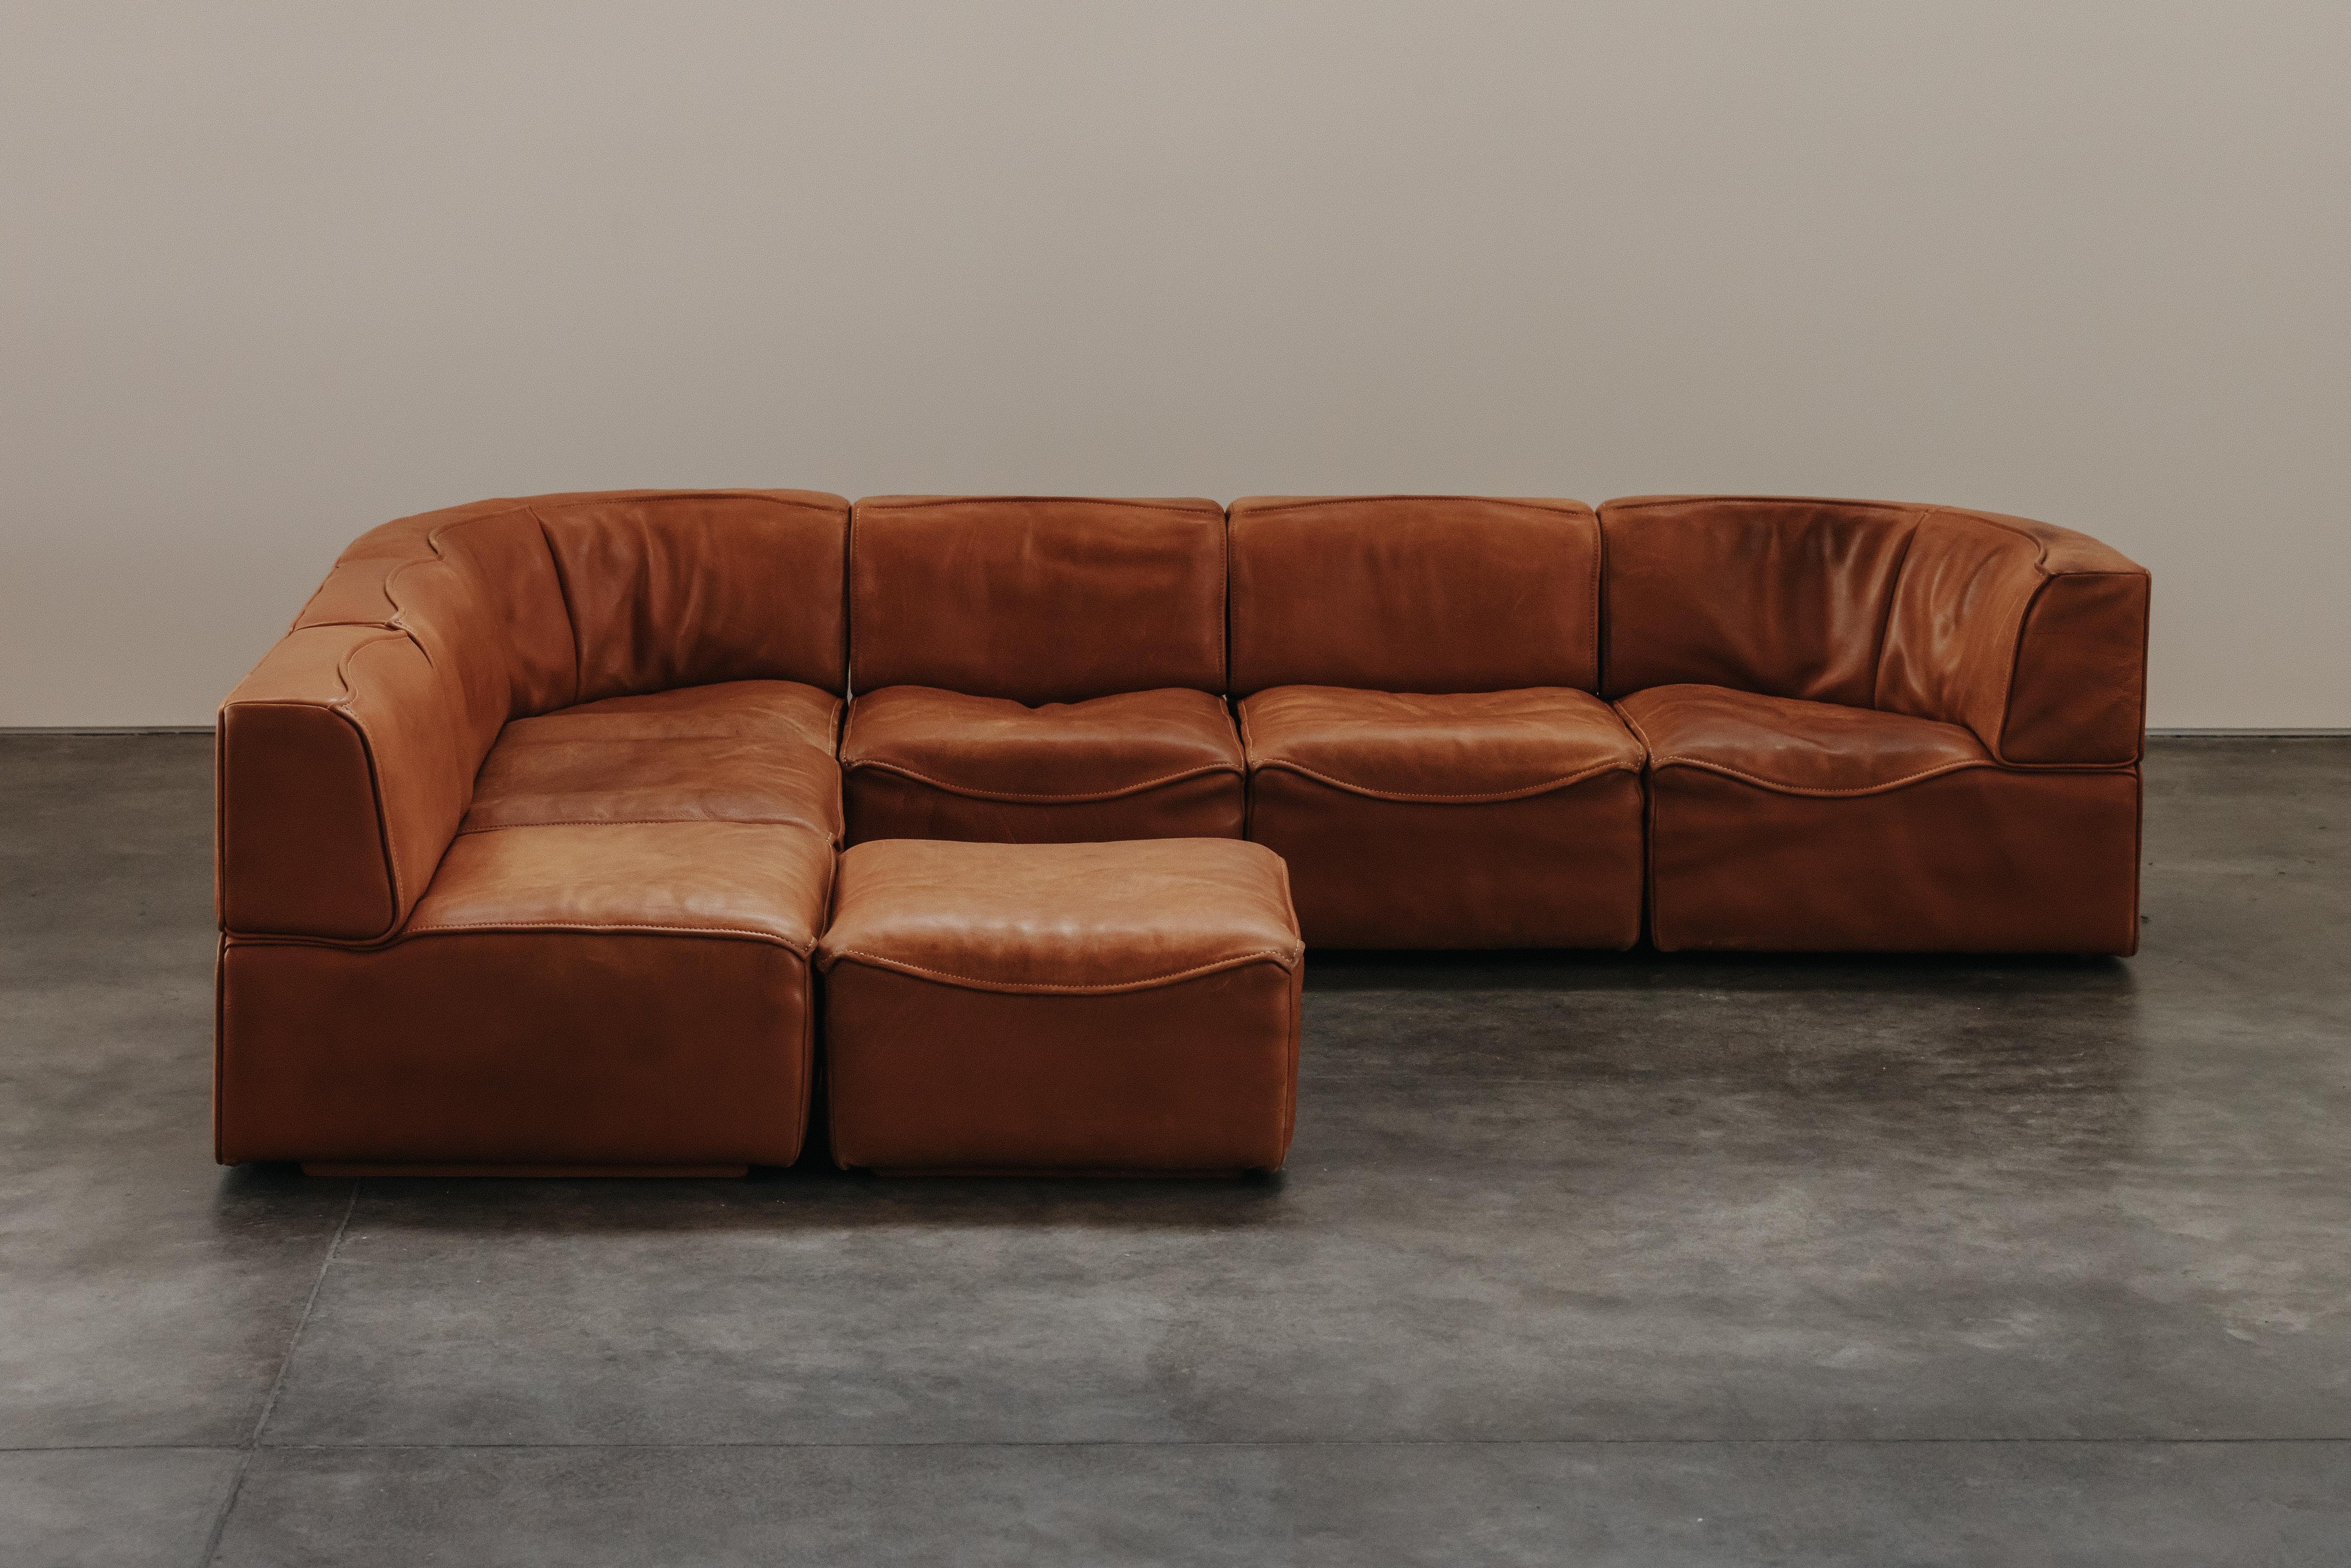 Vintage Cognac Leather De Sede DS-15 Sofa From Switzerland, Circa 1970.  Six modular pieces and an ottoman in thick cognac buffalo leather.  Superb quality and design.